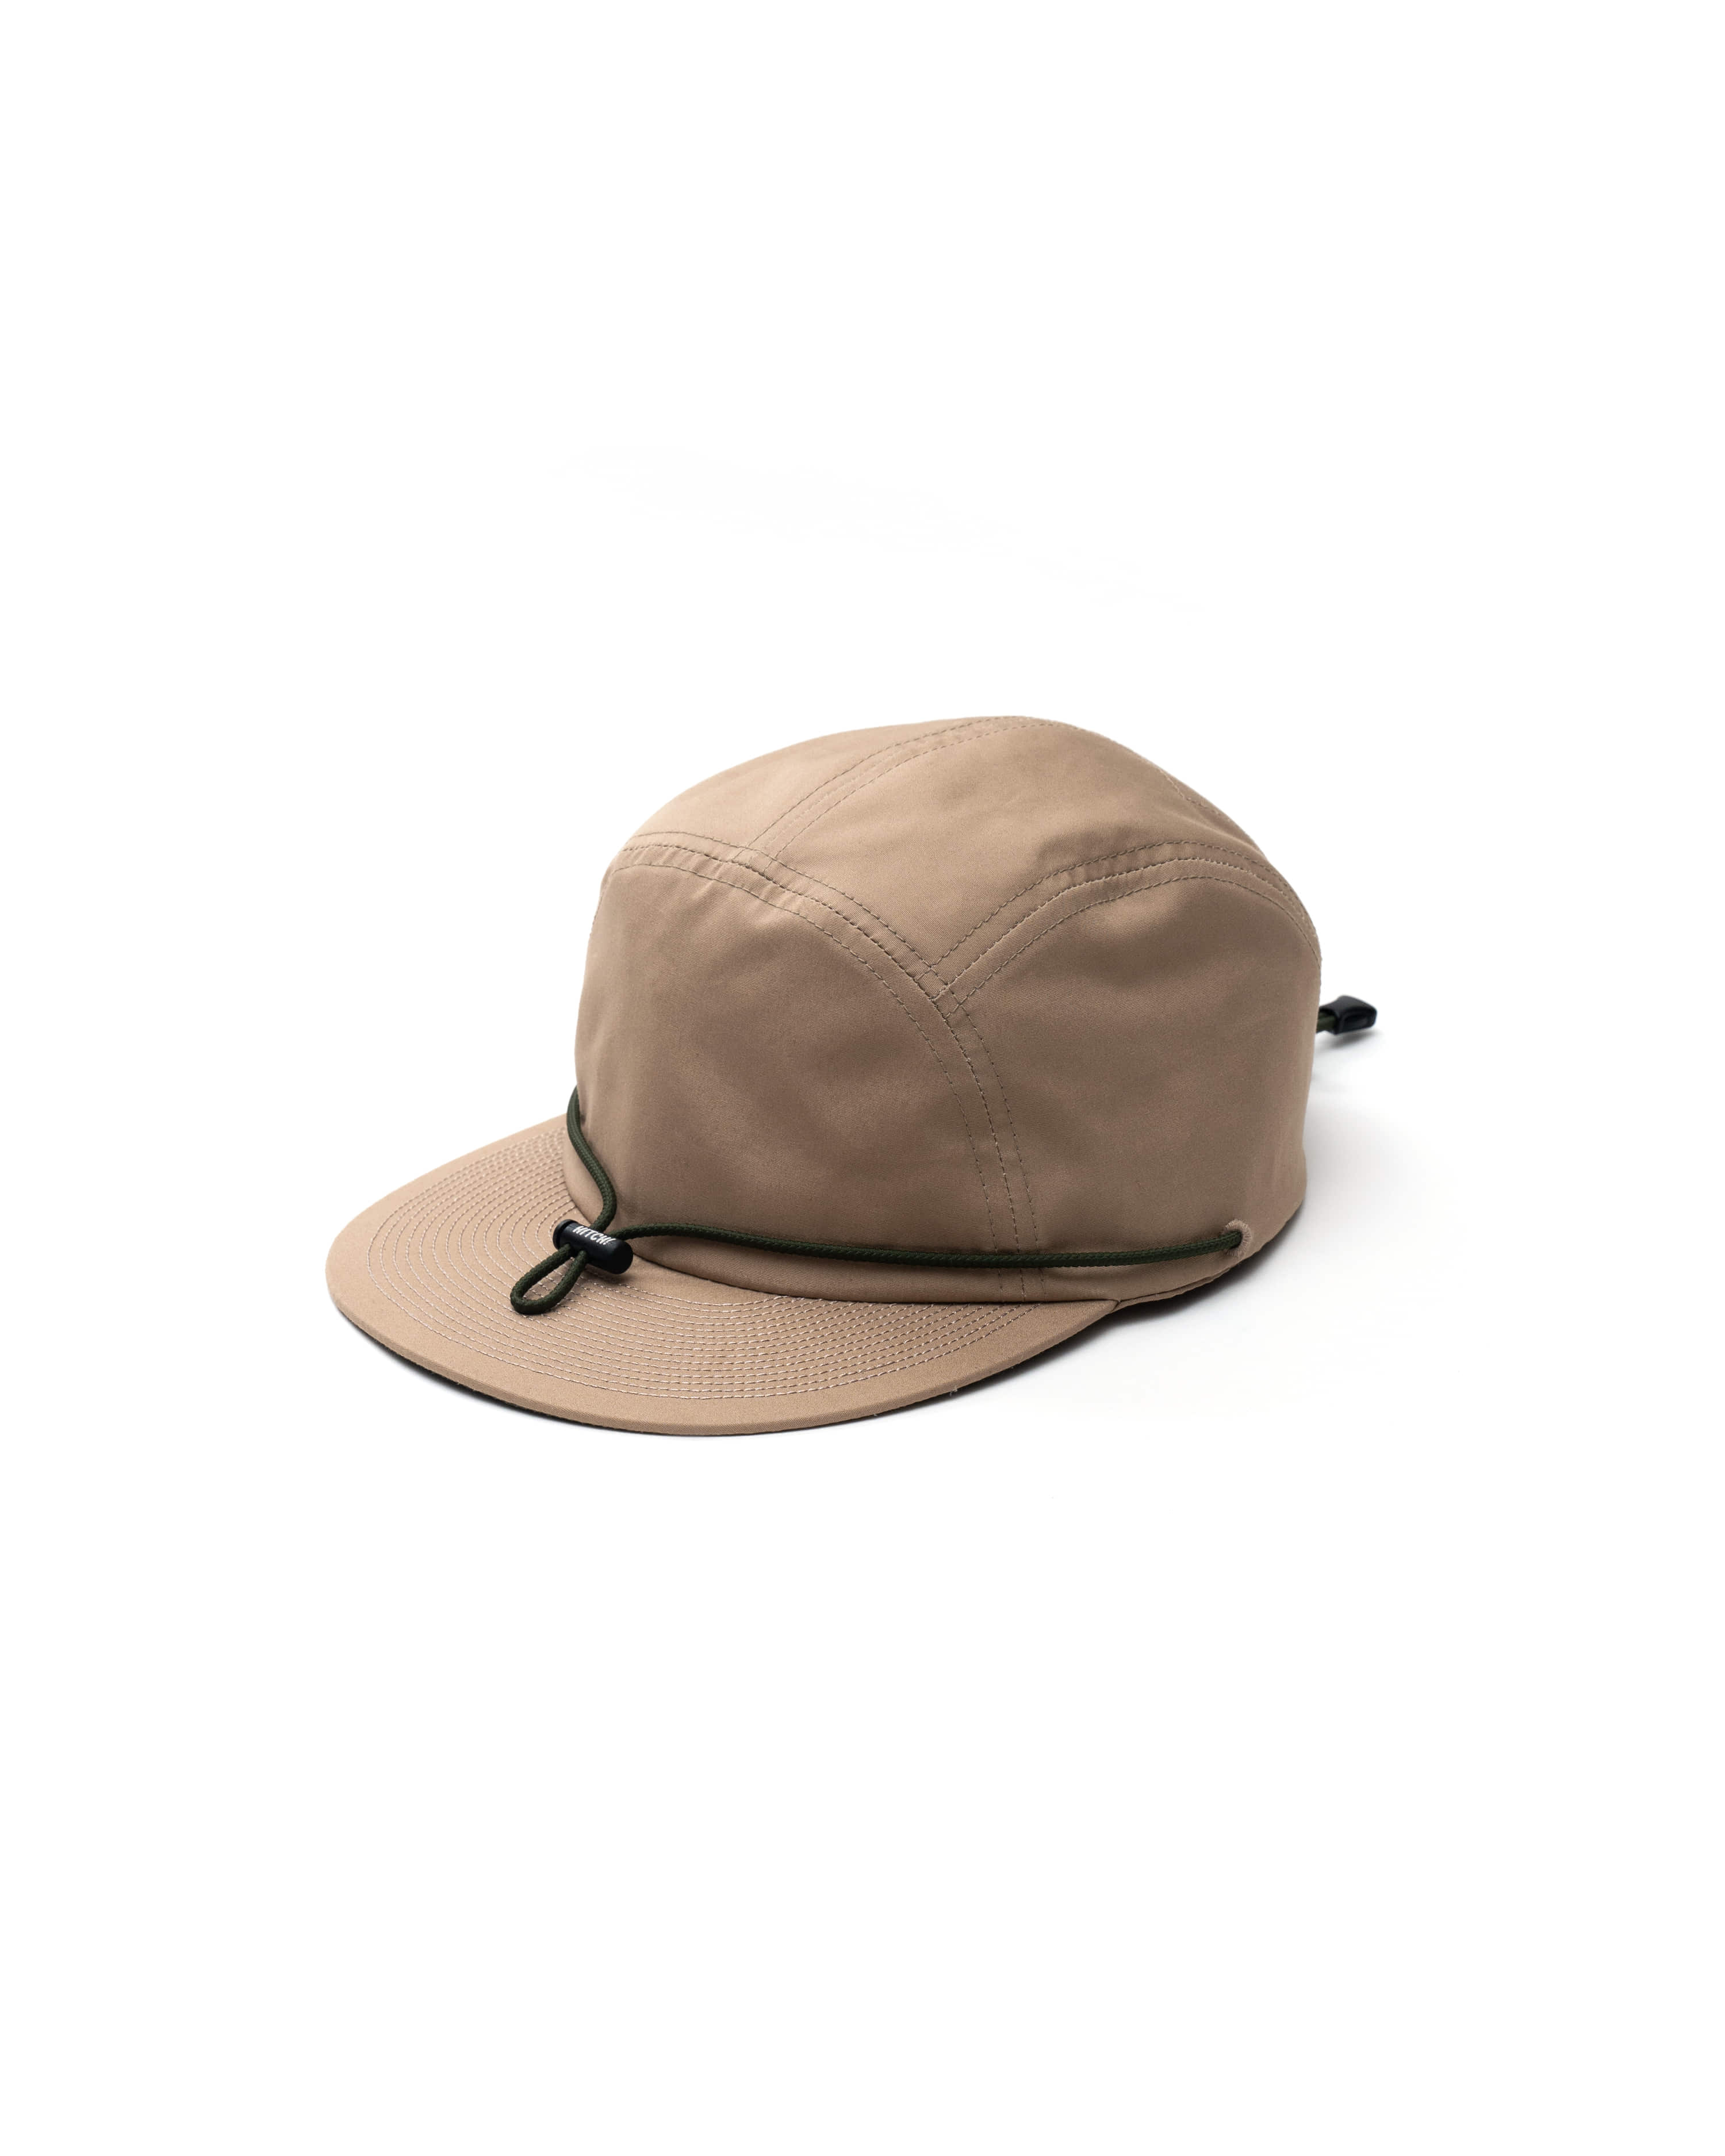 [out of stock] Boat 1 - Beige (Ventile Fabric)